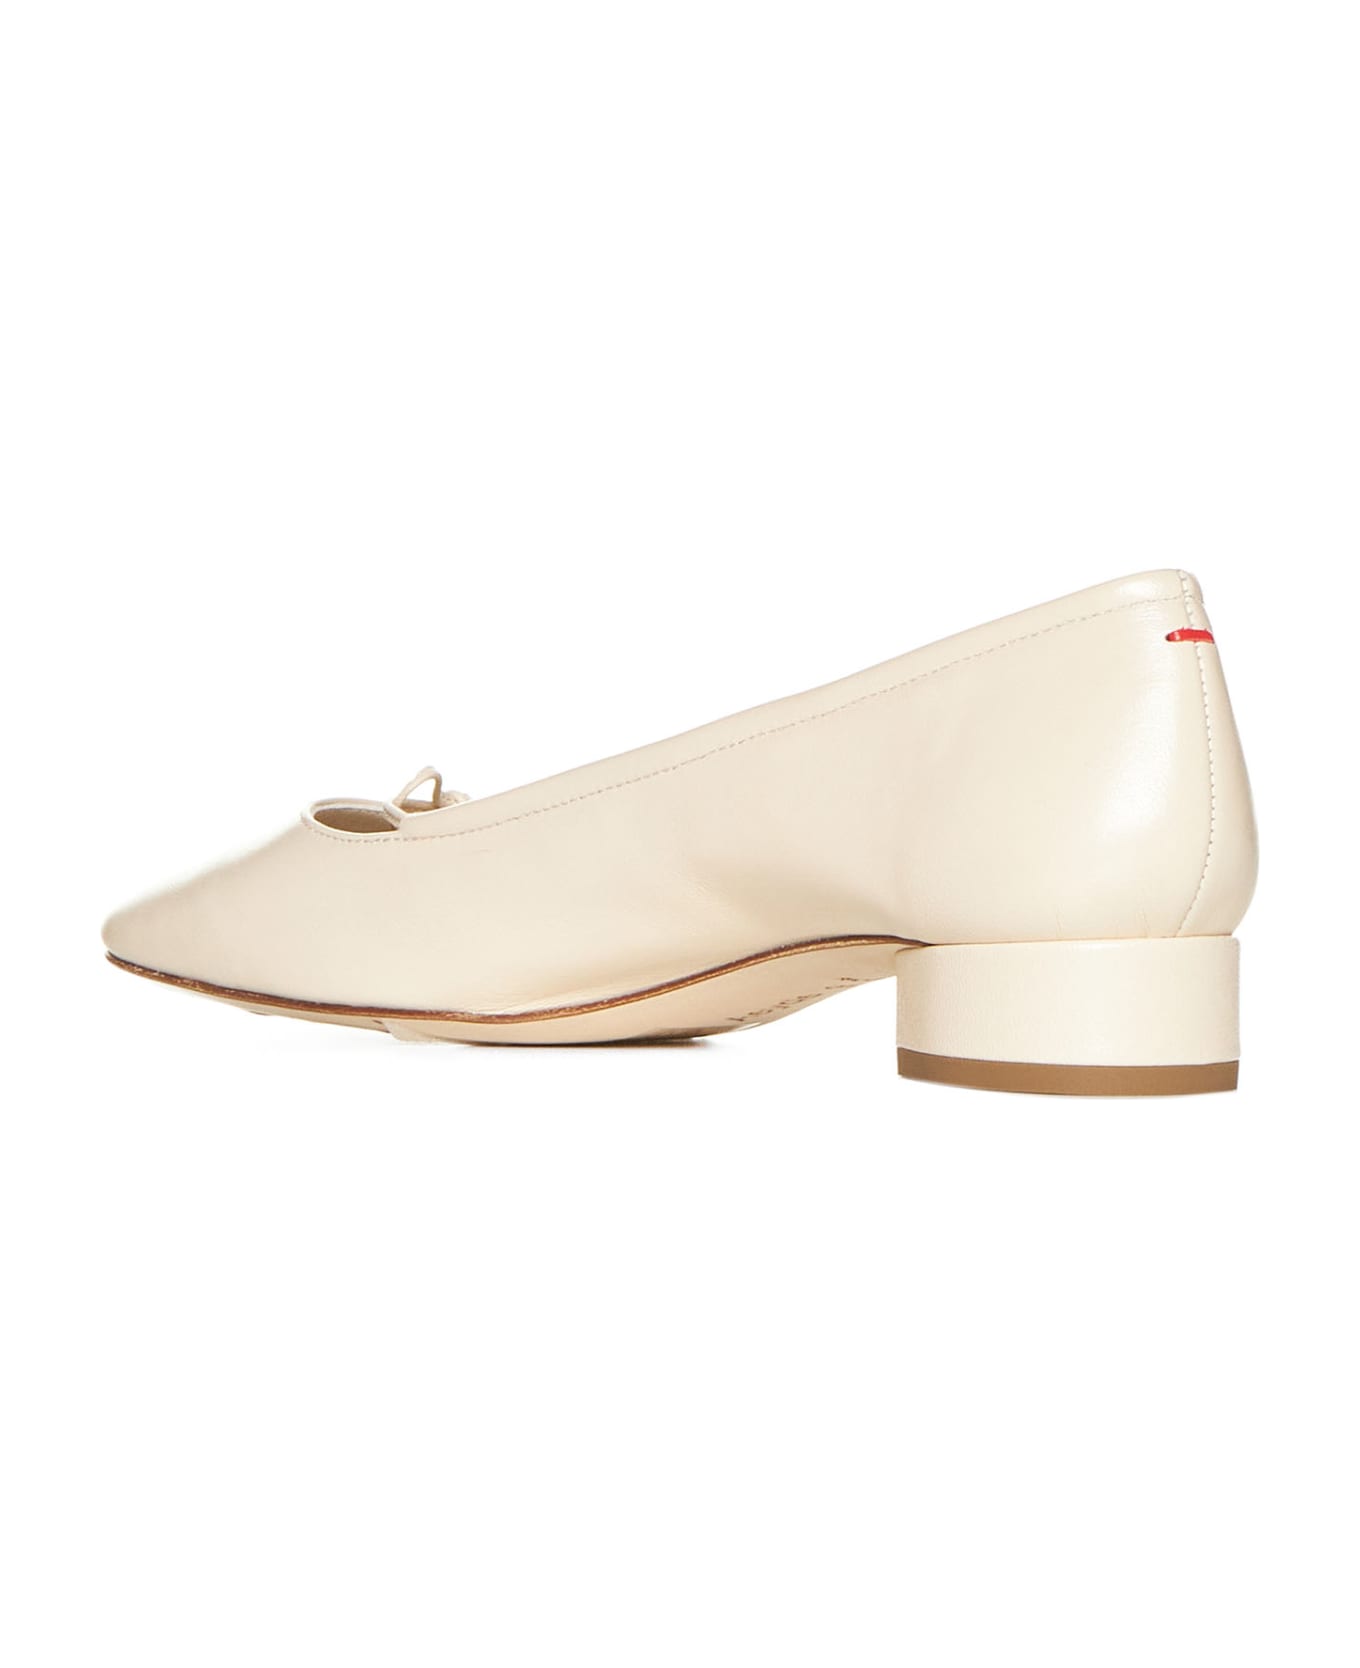 aeyde Flat Shoes - Creamy